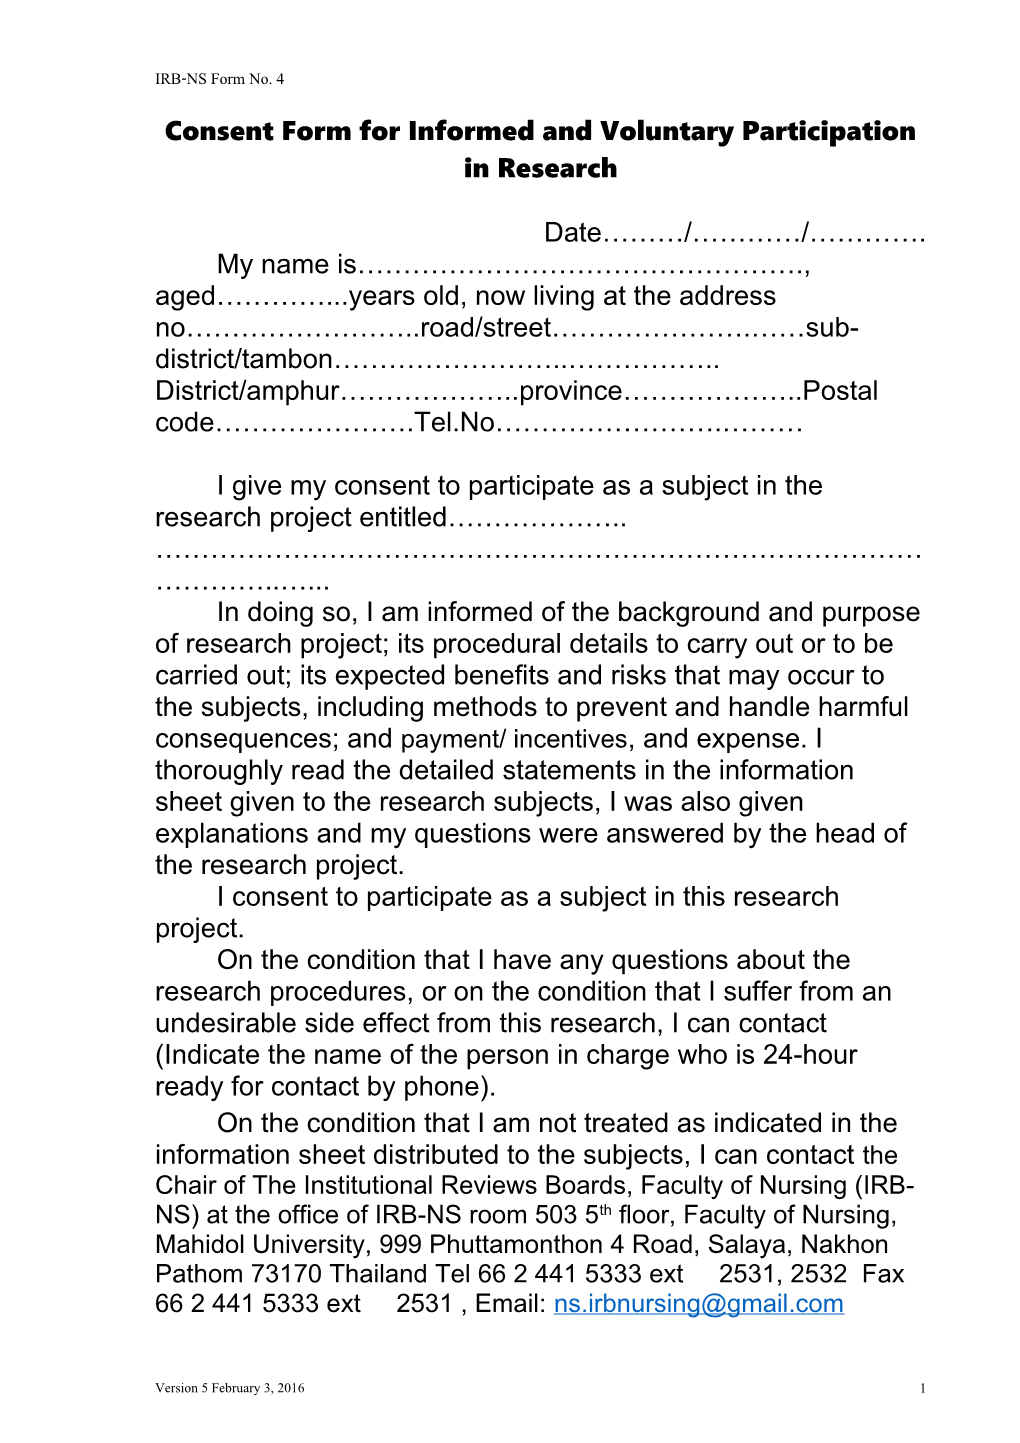 Consent Form for Informed and Voluntary Participation in Research